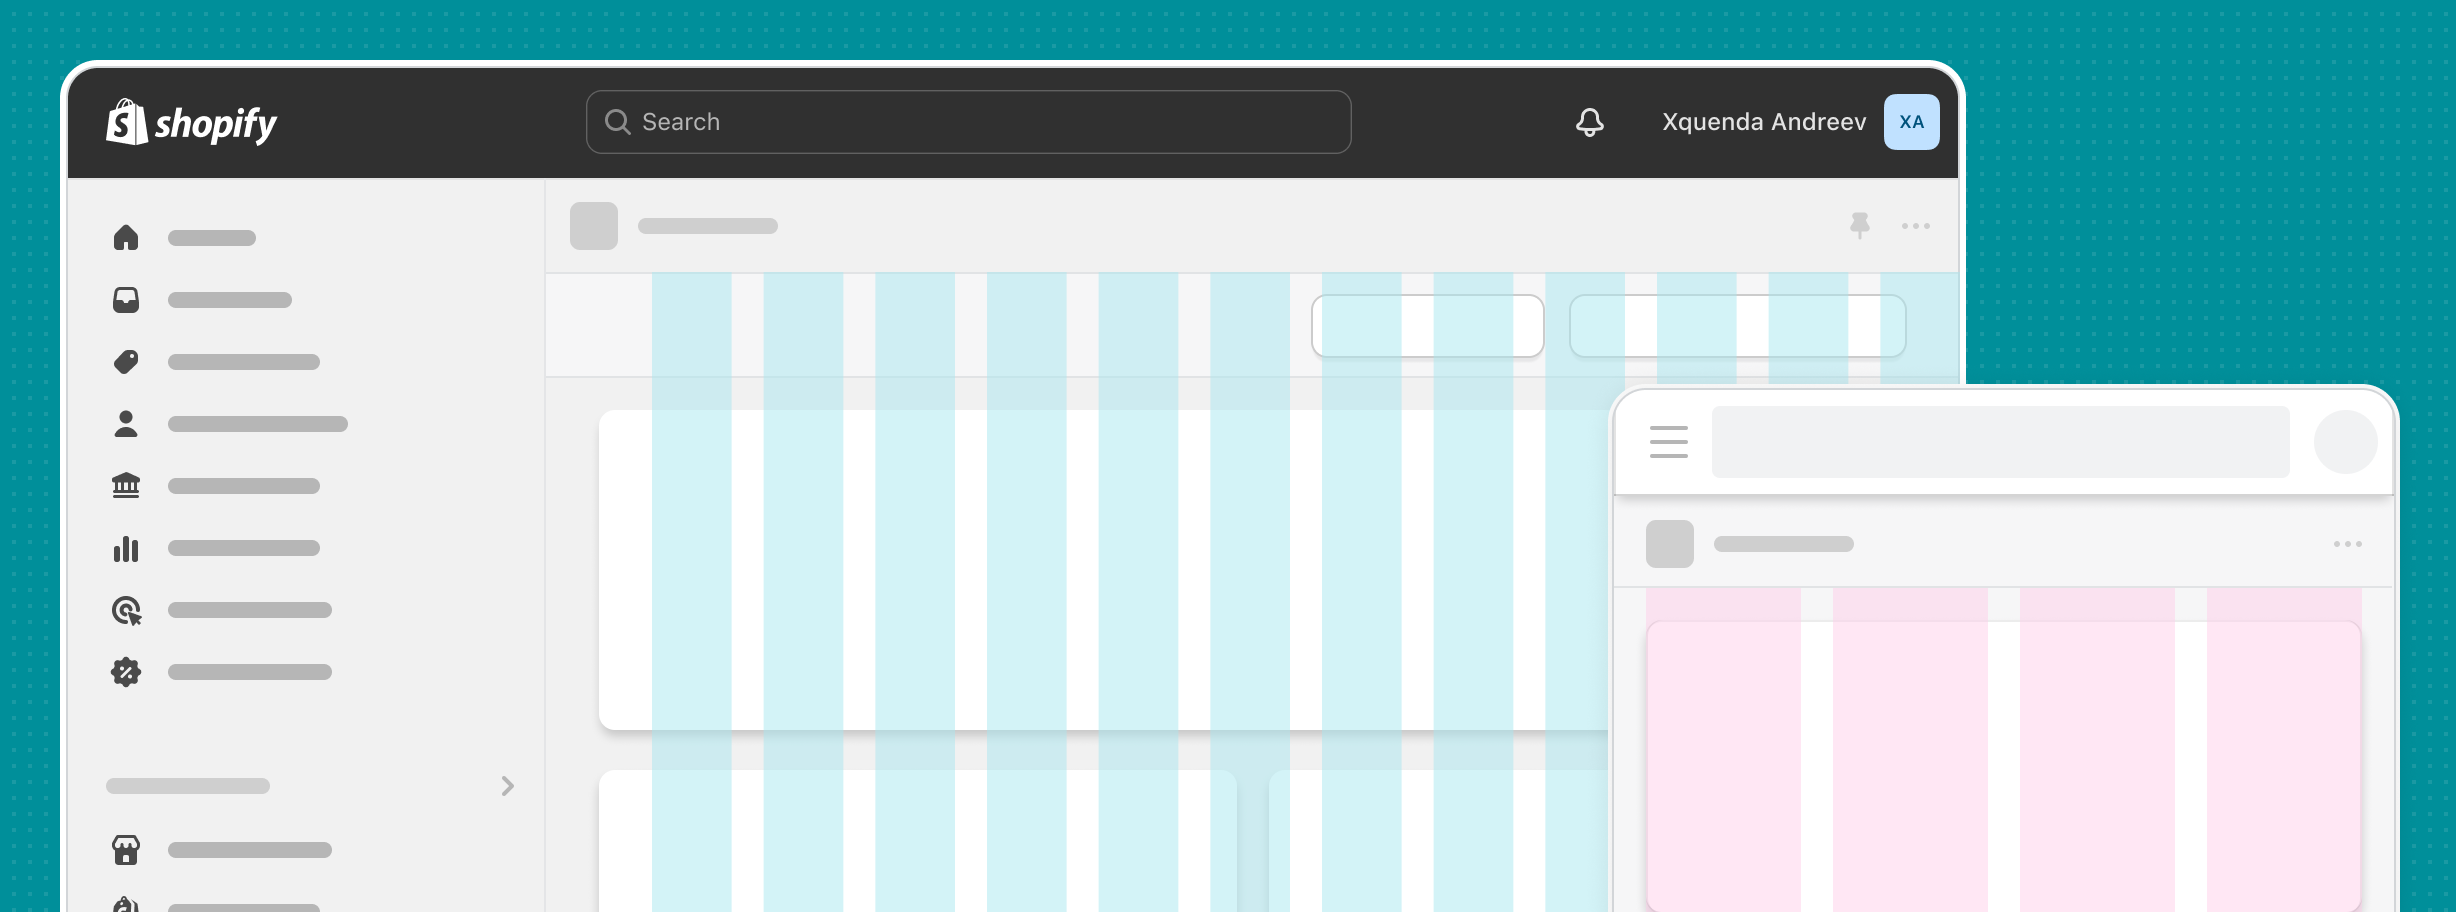 The responsive layout grid.